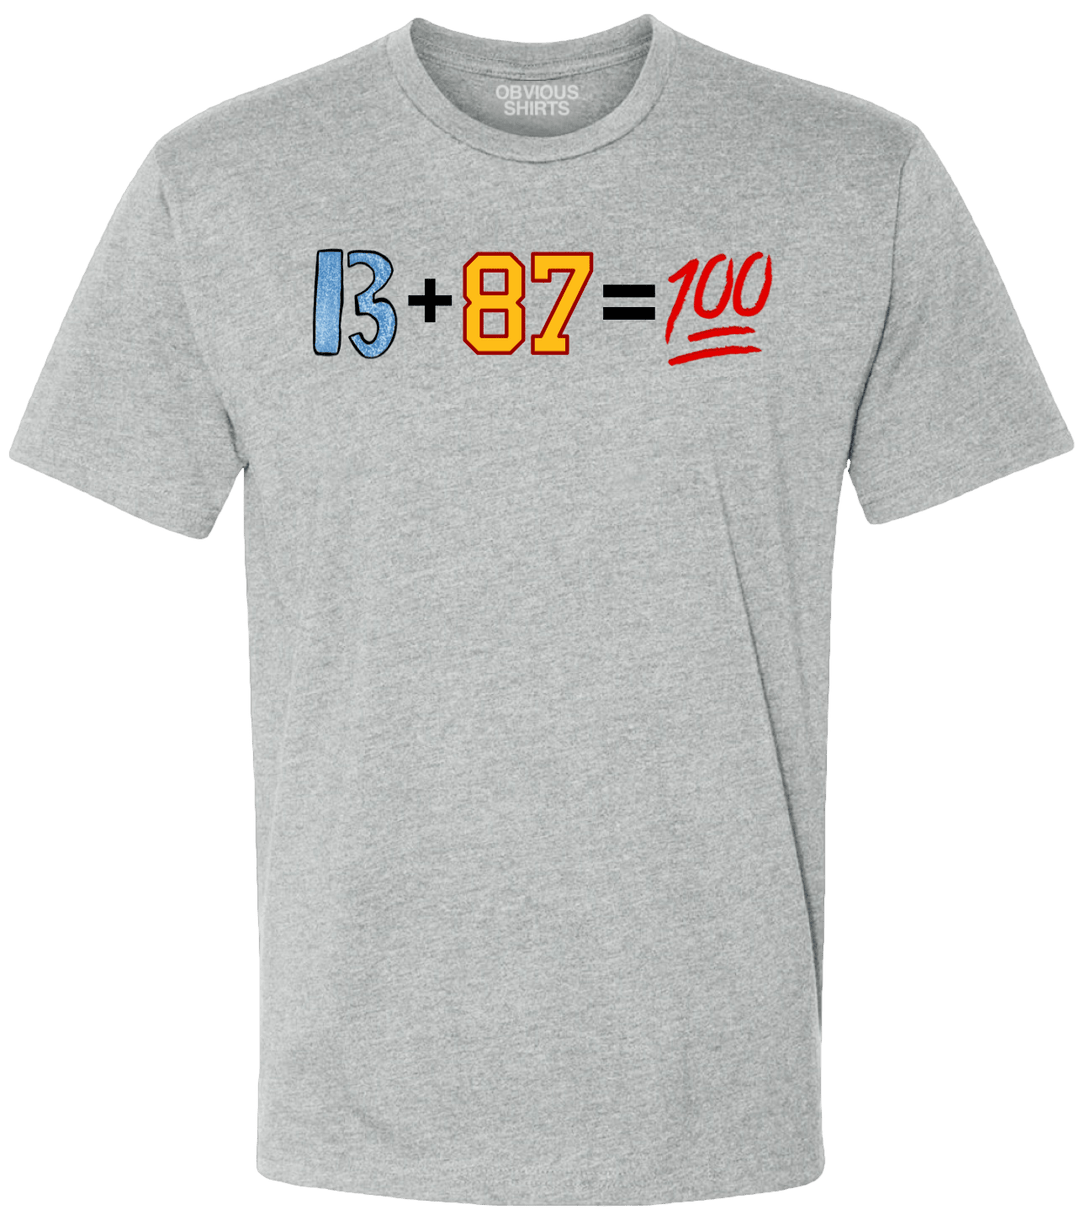 13+87=100 - OBVIOUS SHIRTS